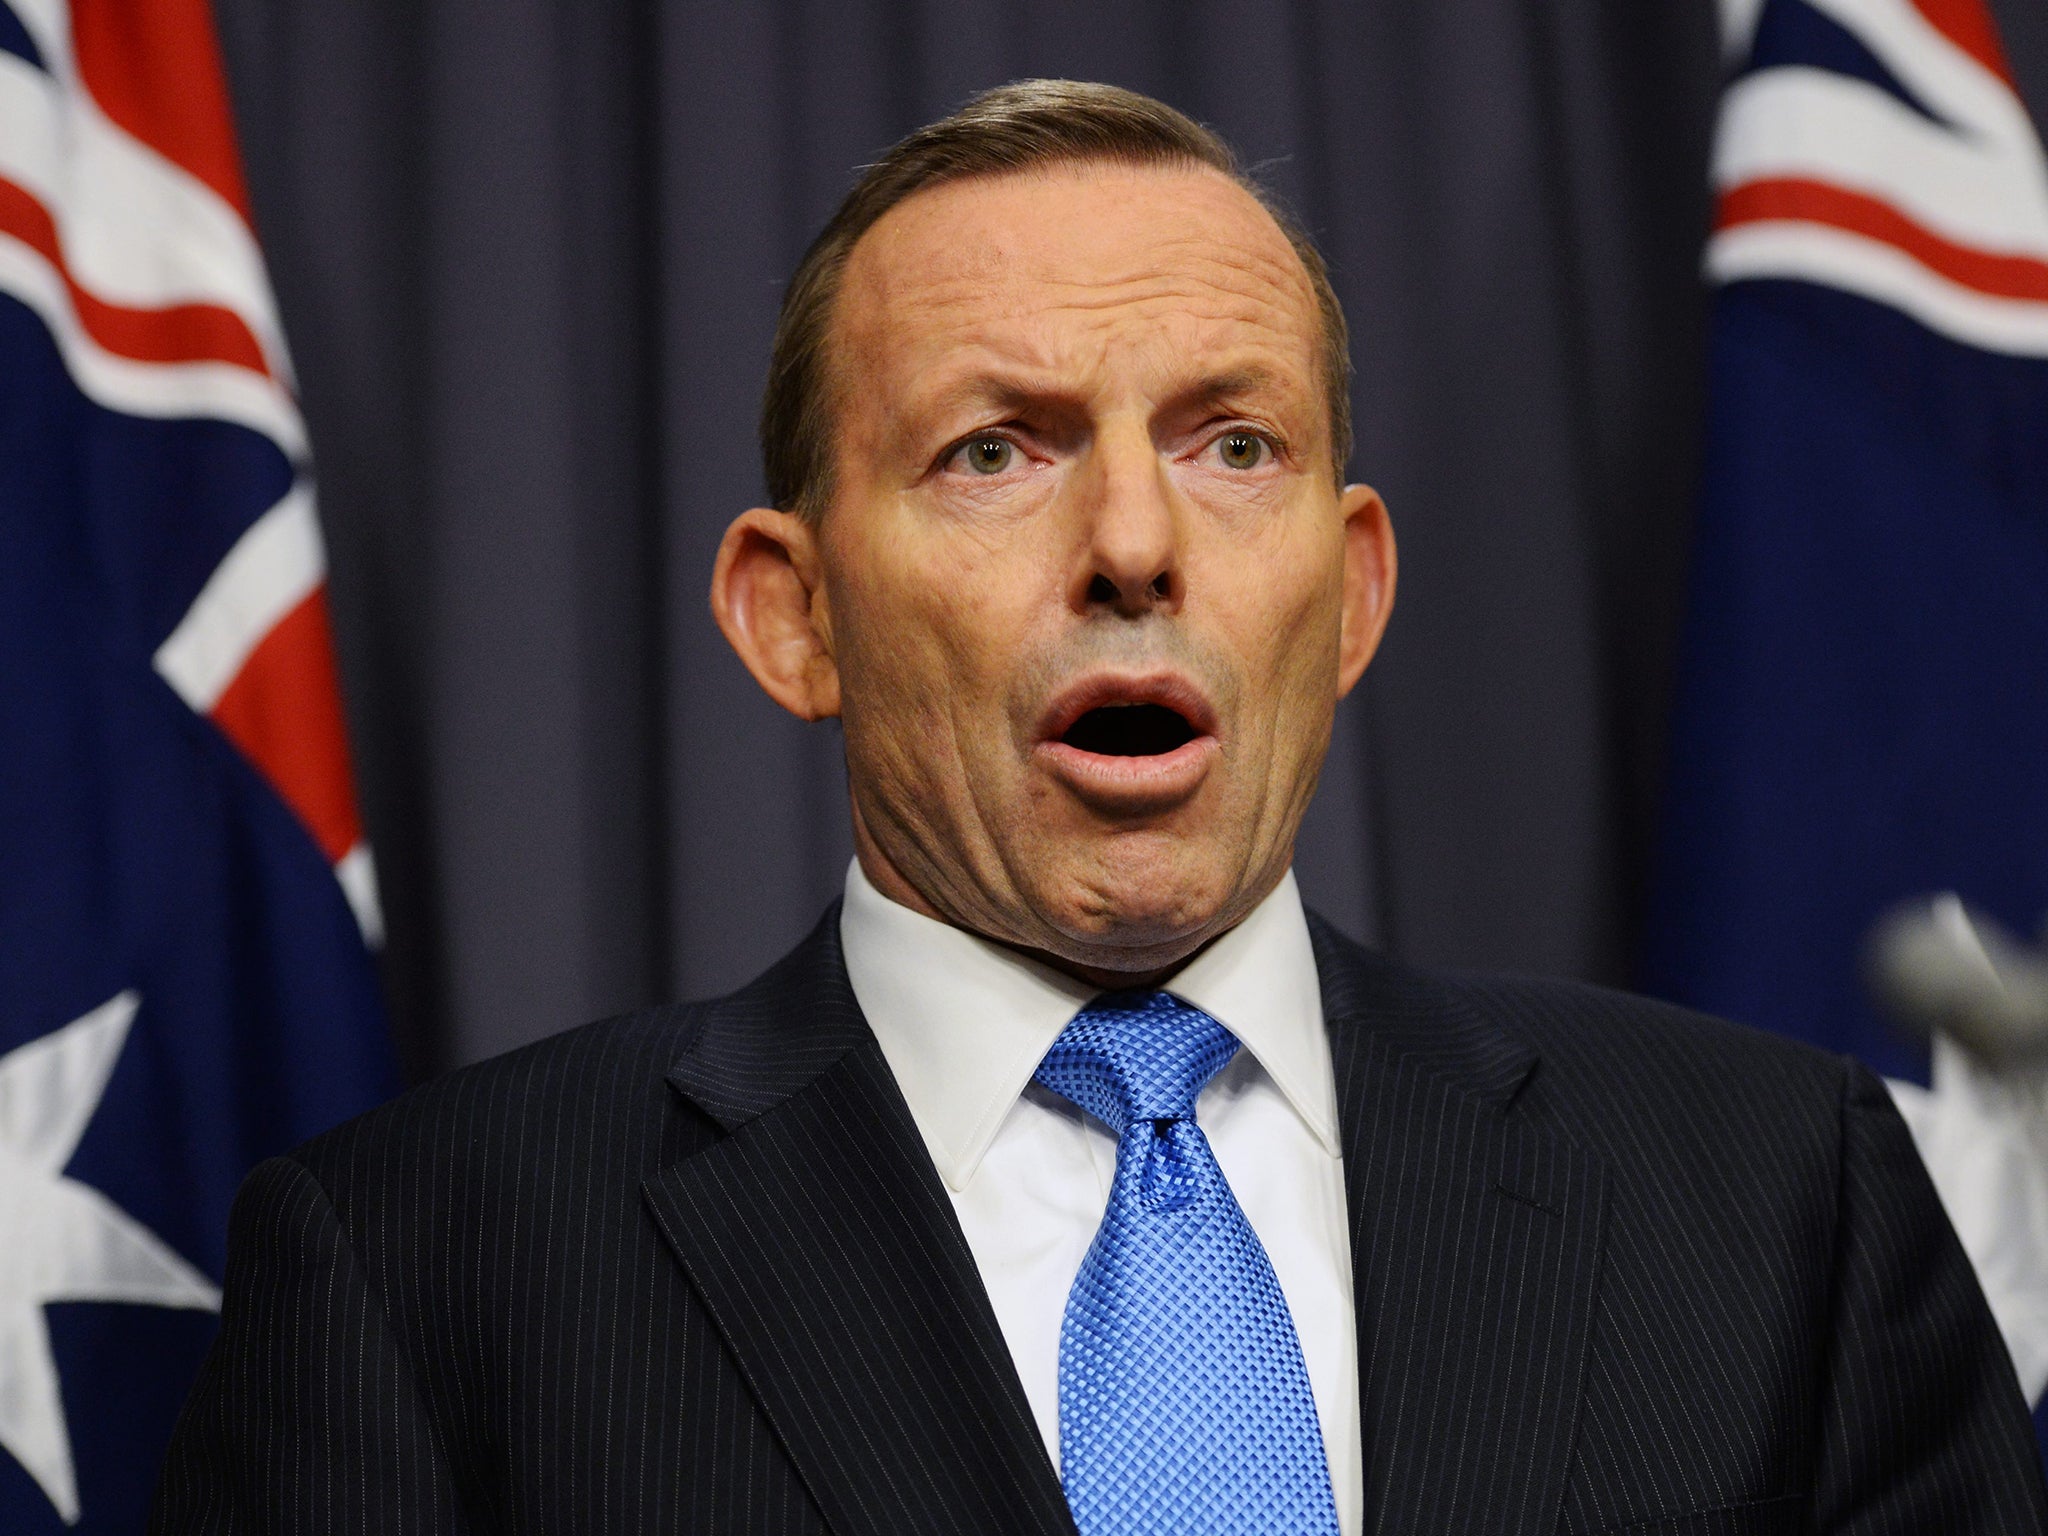 Australian Prime Minister Tony Abbott speaks during a press conference in the Blue Room, at Parliament House in Canberra, Australia